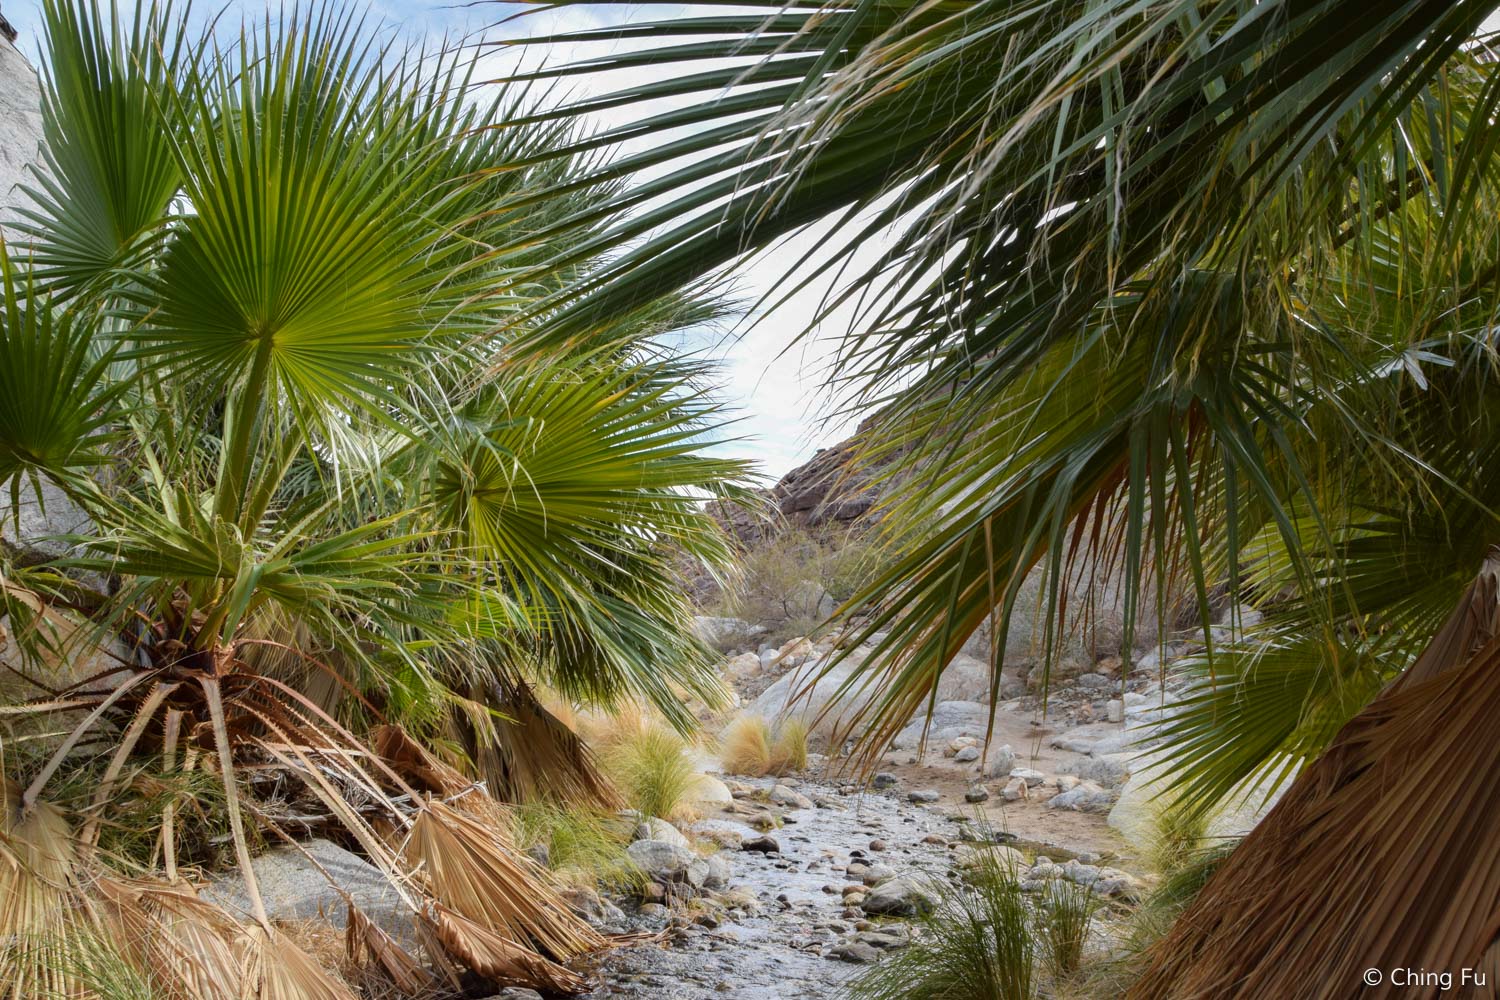  As true to the definition of an oasis, there was a running creek by the grove of palm trees. 